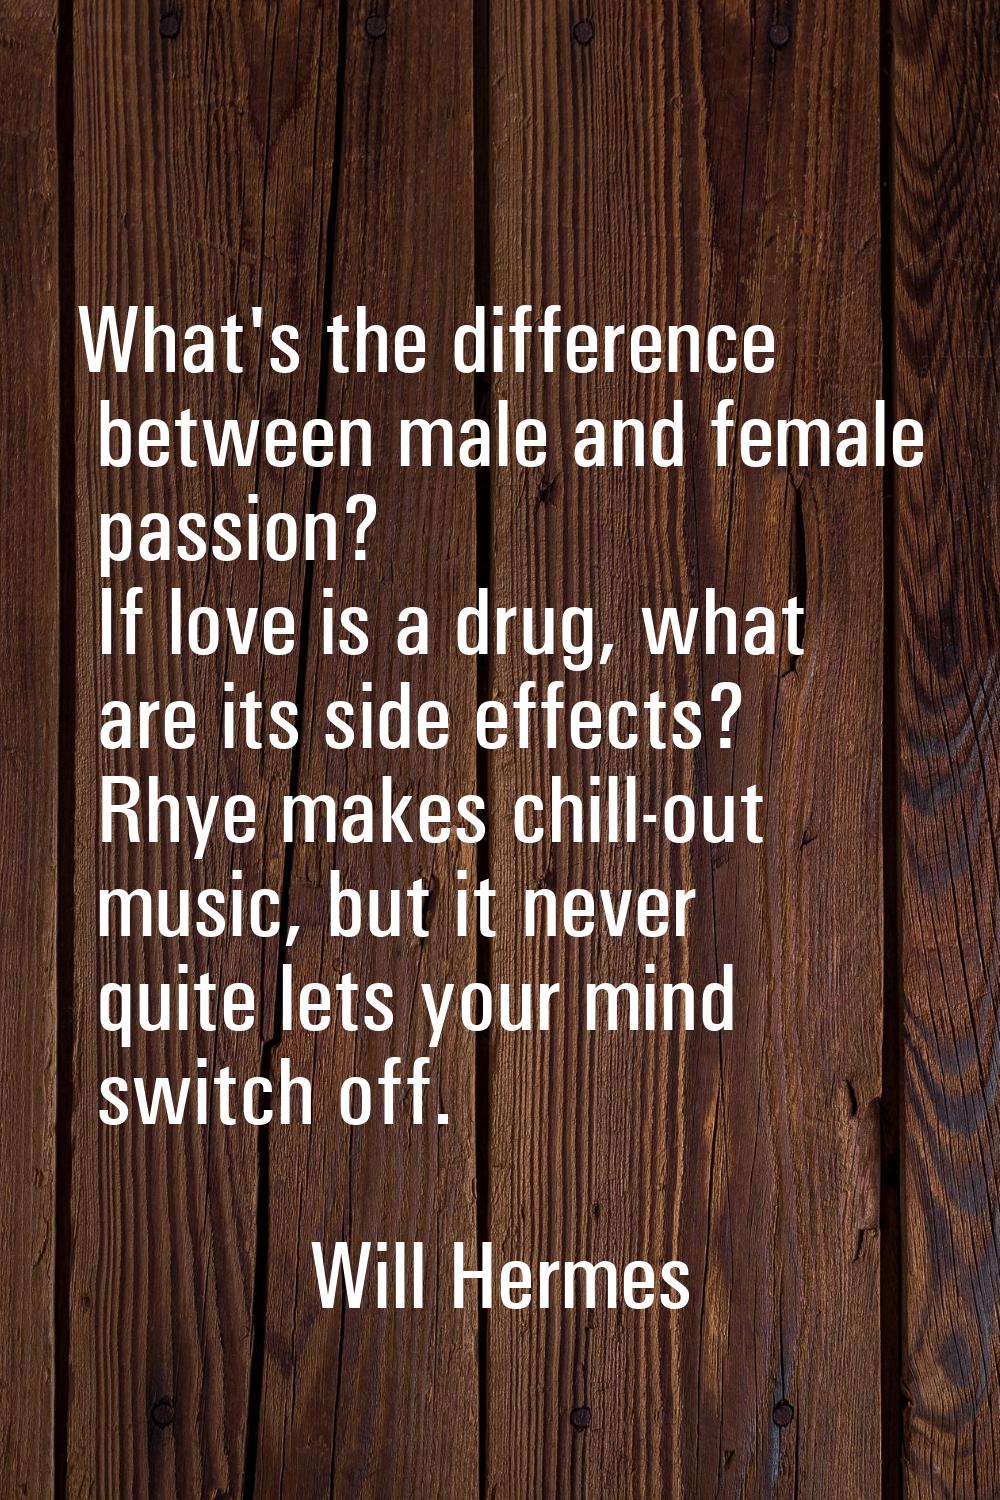 What's the difference between male and female passion? If love is a drug, what are its side effects